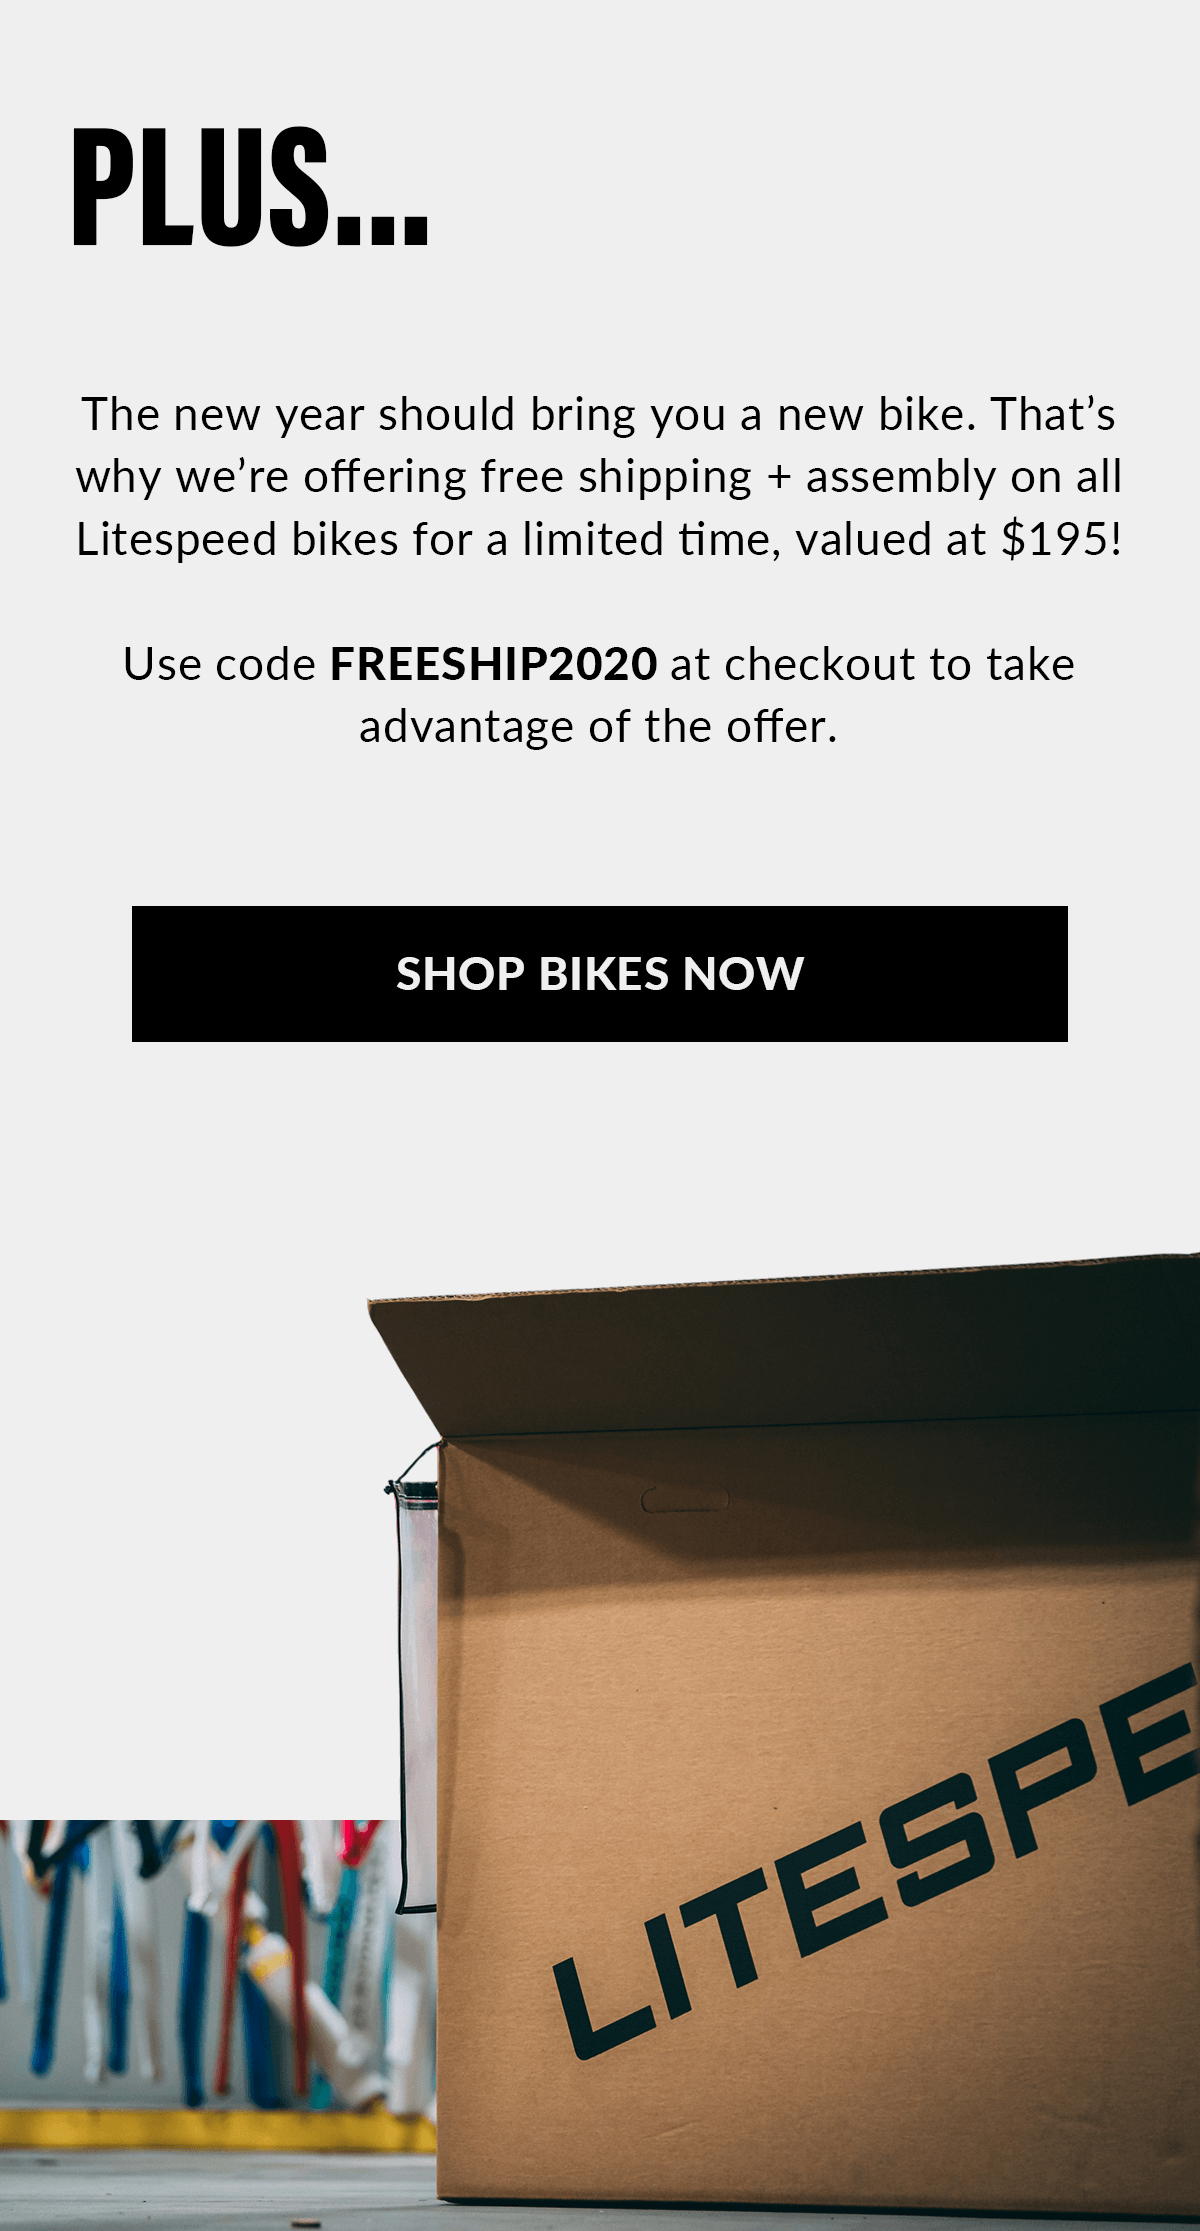 We're offering free shipping + assembly on all Litespeed bikes for a limited time, valued at $195! Use code FREESHIP2020 at checkout to take advantage of the offer.